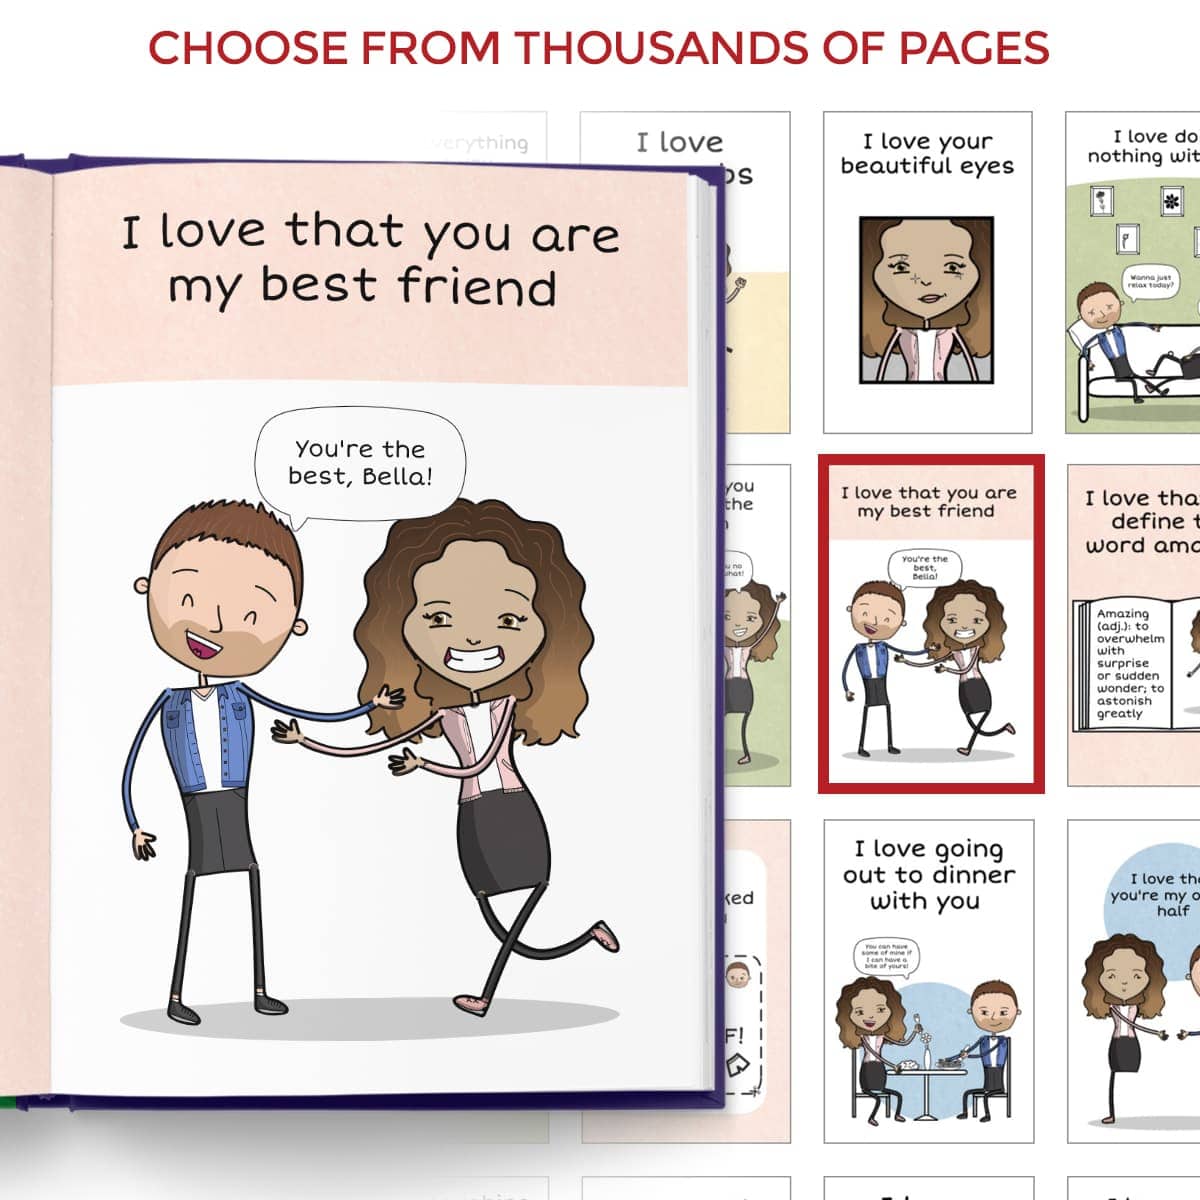 Valentine's Day Gifts by LoveBook | The Personalized Gift Book That Says Why You Love Someone | LoveBook Online - 2